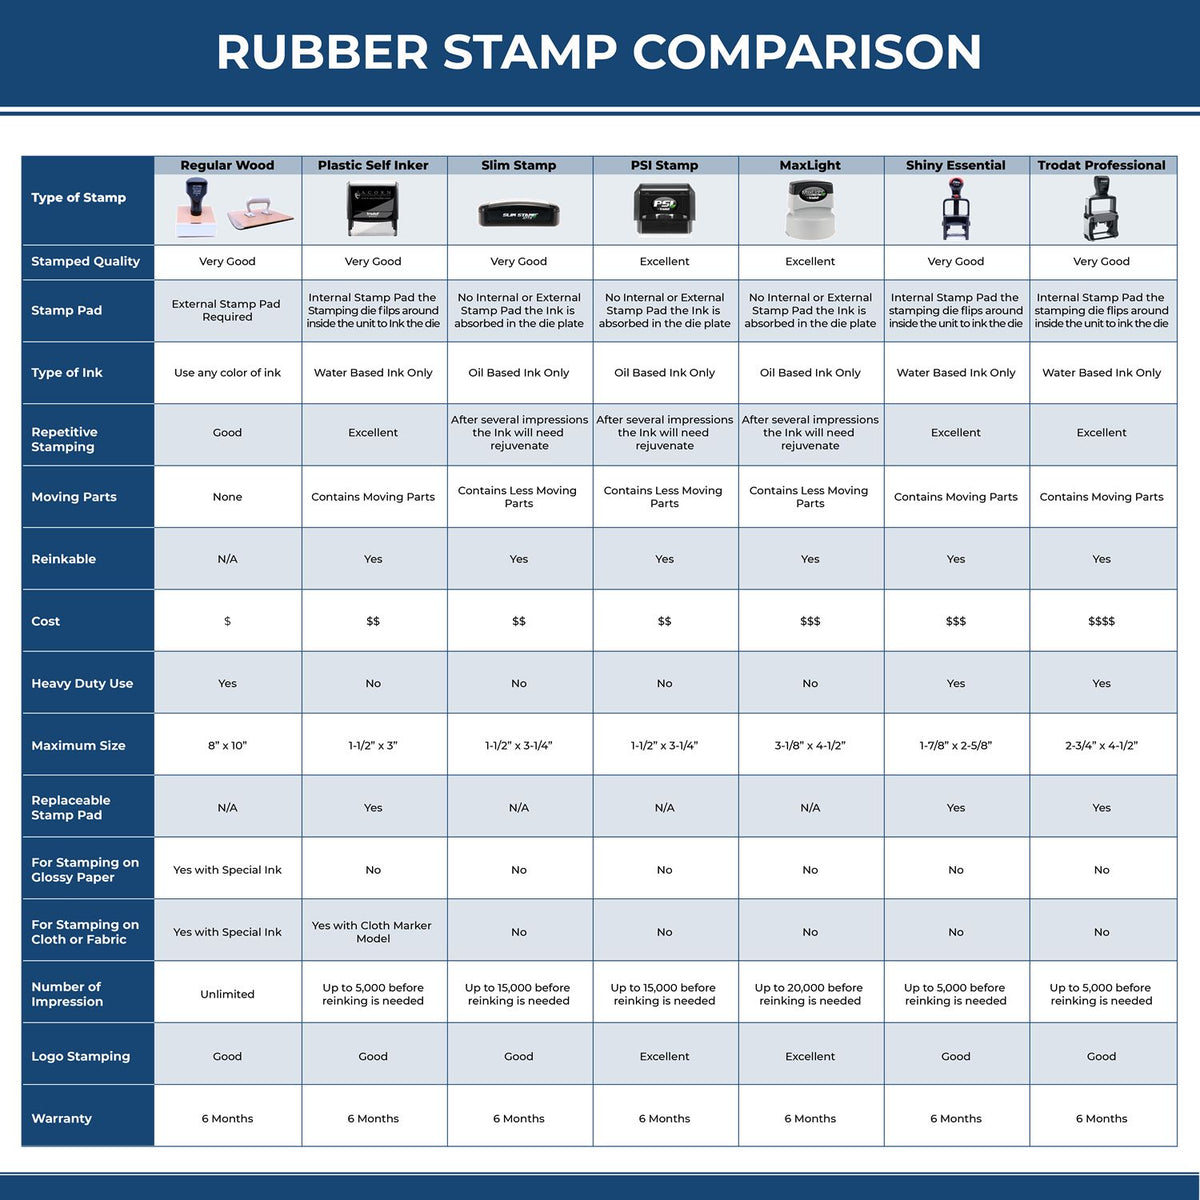 Large Pre Inked Investments Stamp 4568SLIM Rubber Stamp Comparison